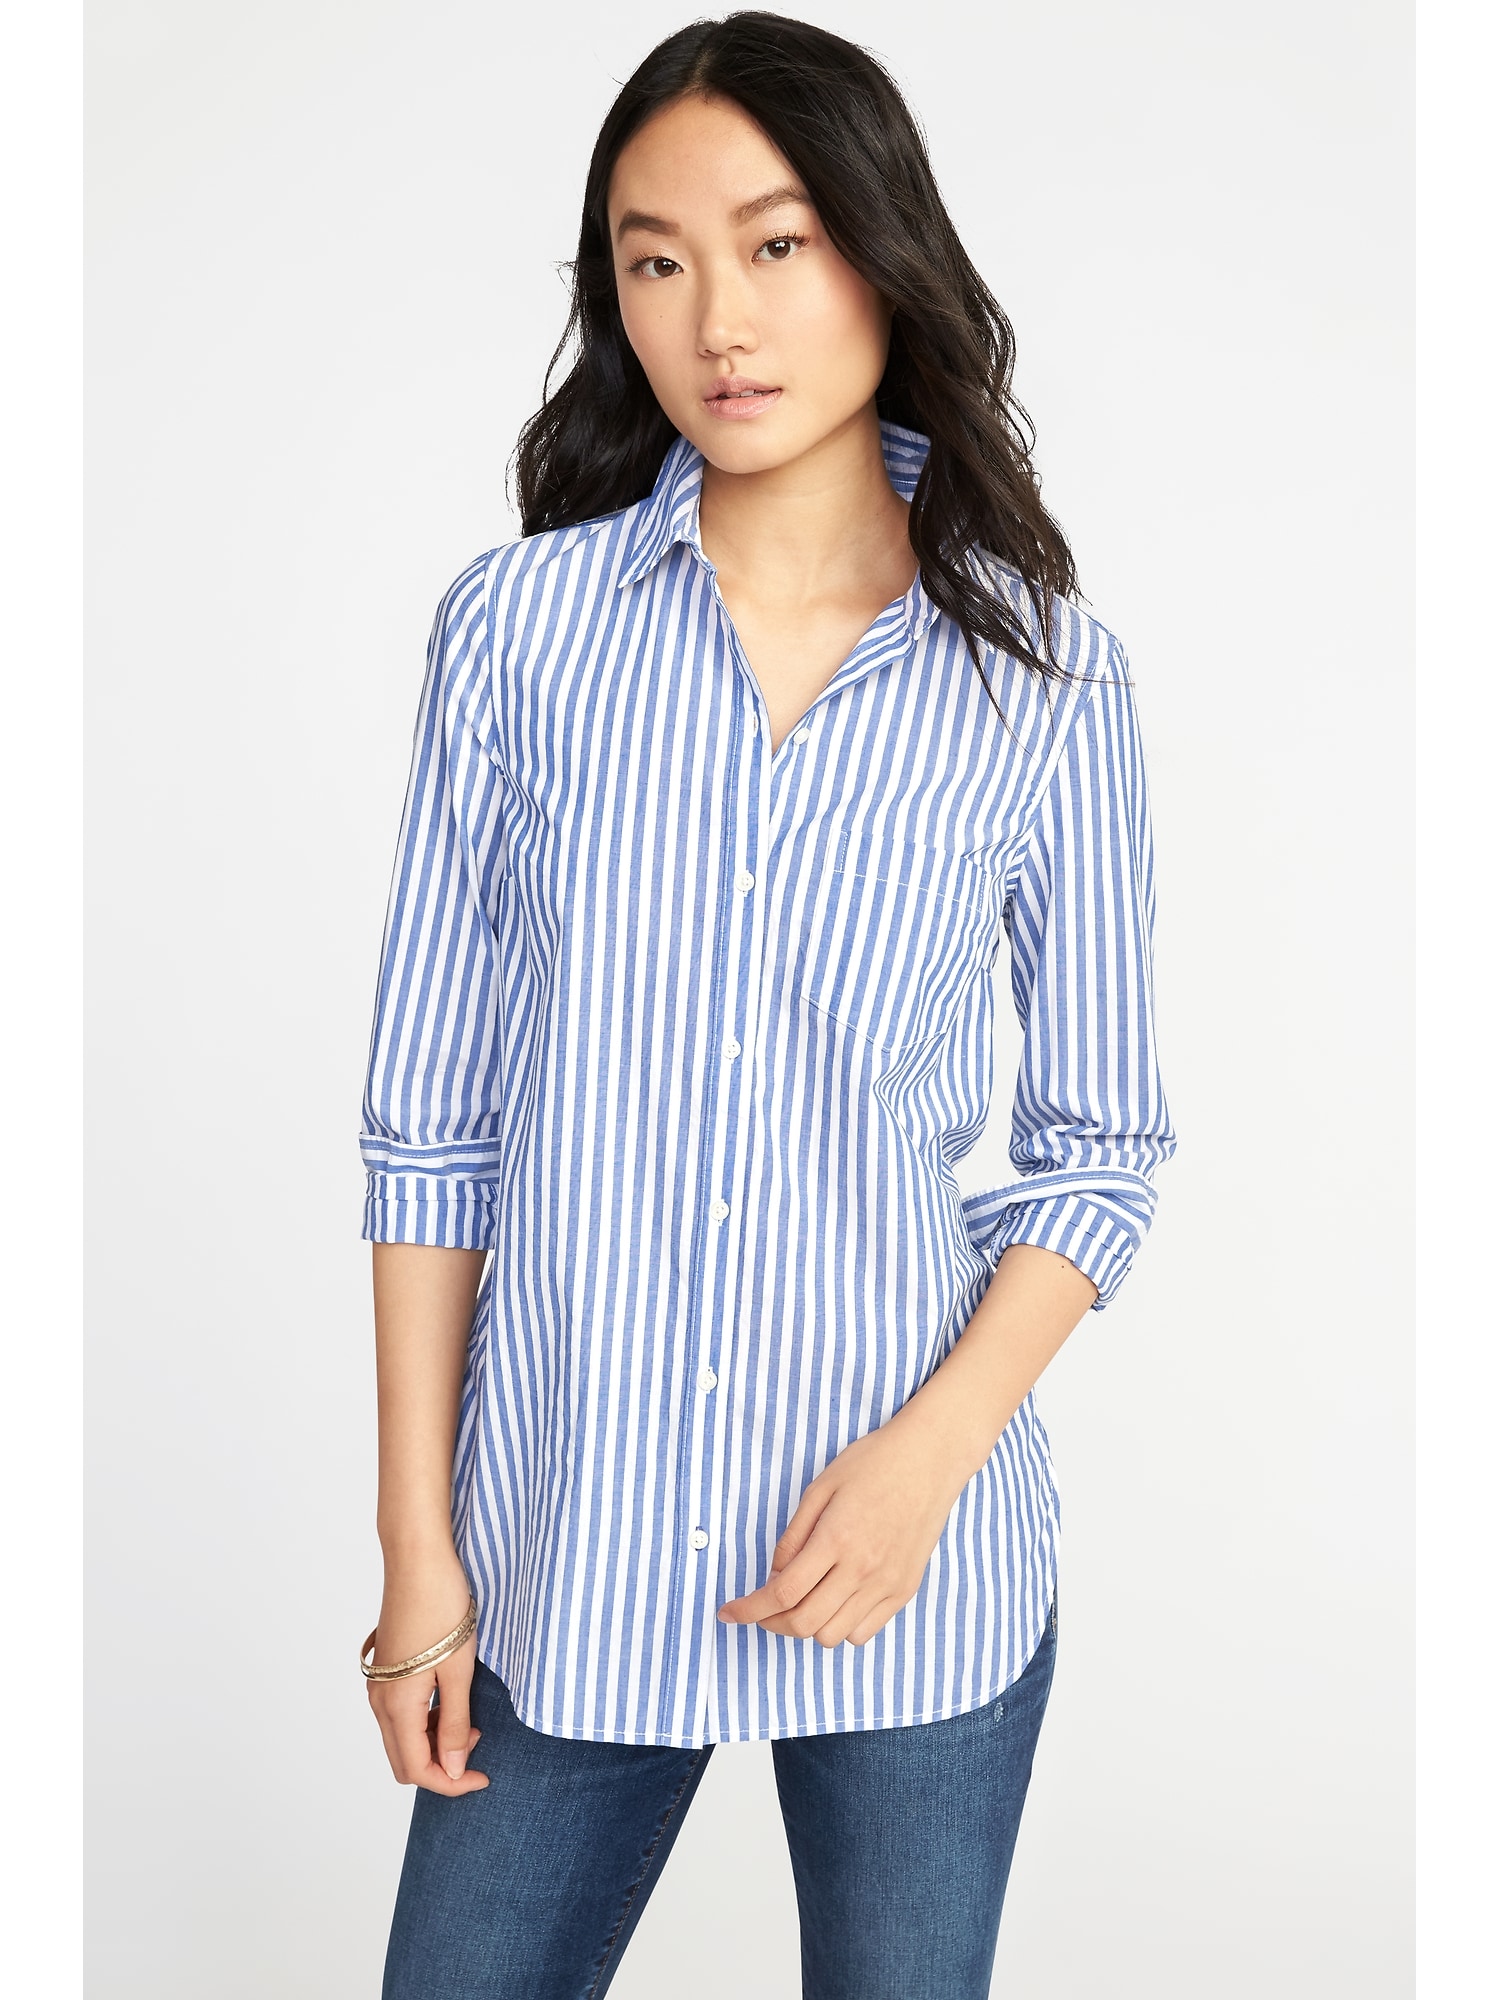 Classic Relaxed Striped Tunic for Women